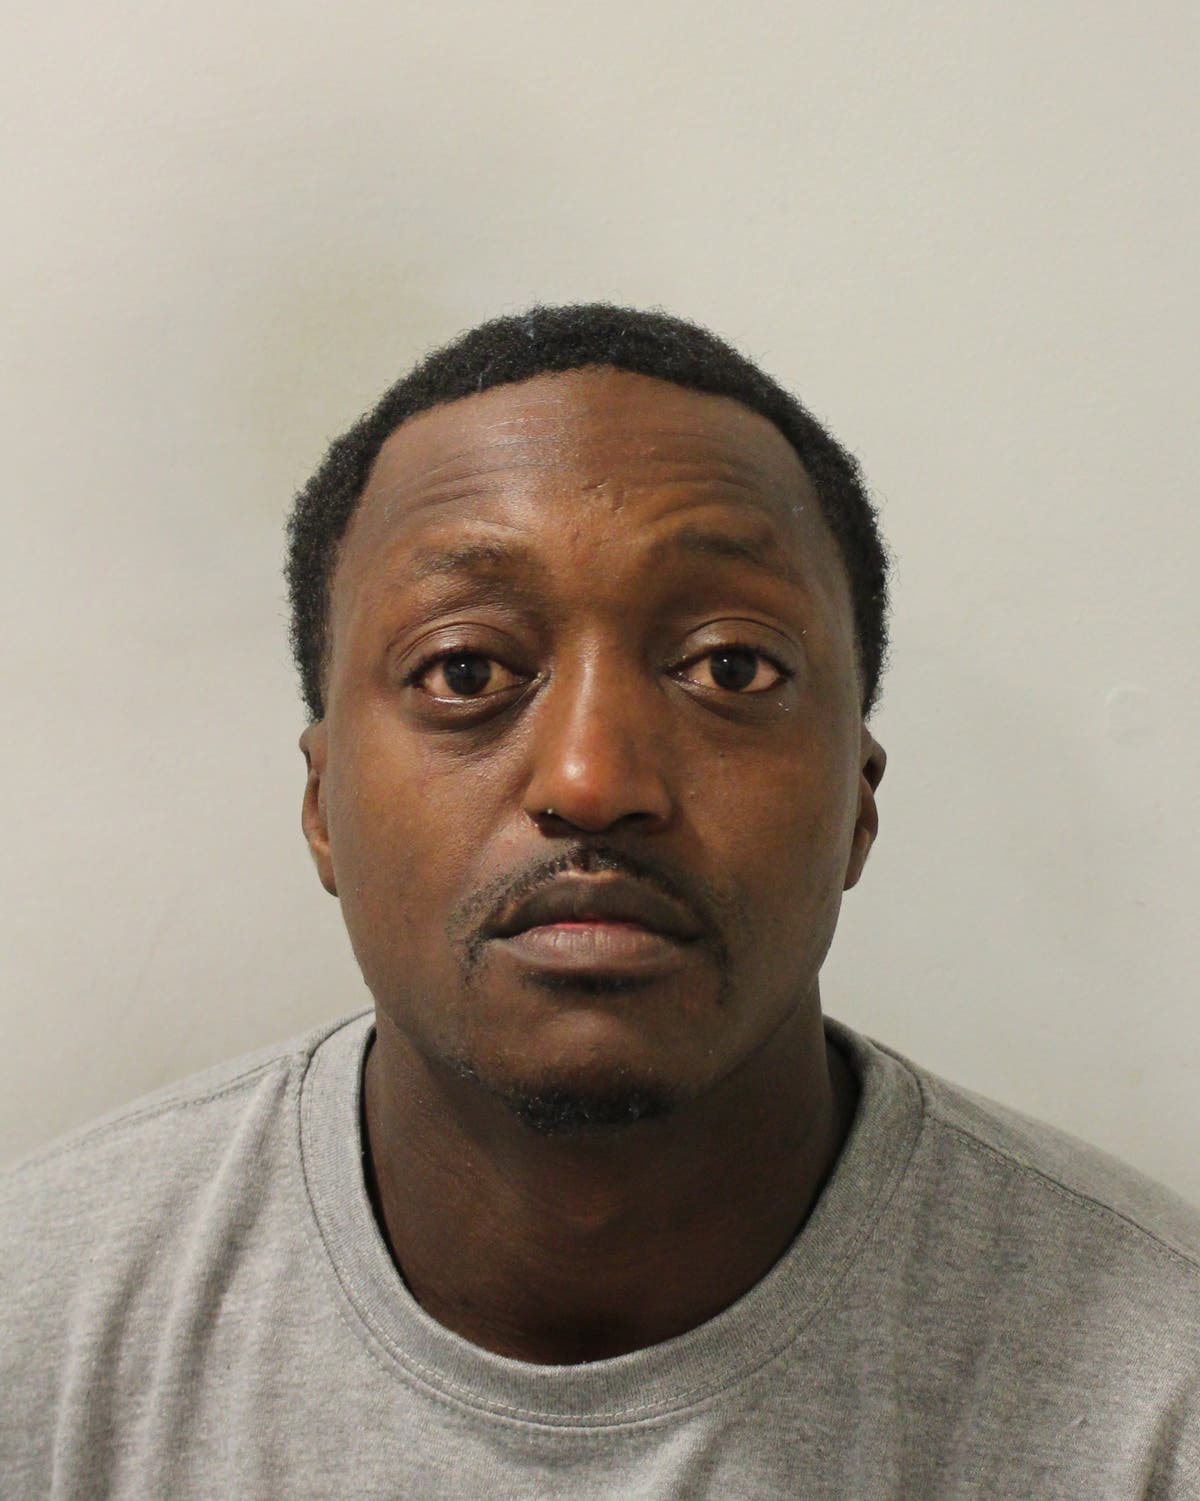 'Violent predator' kidnapped woman and attempted to rape her in van in Haringey